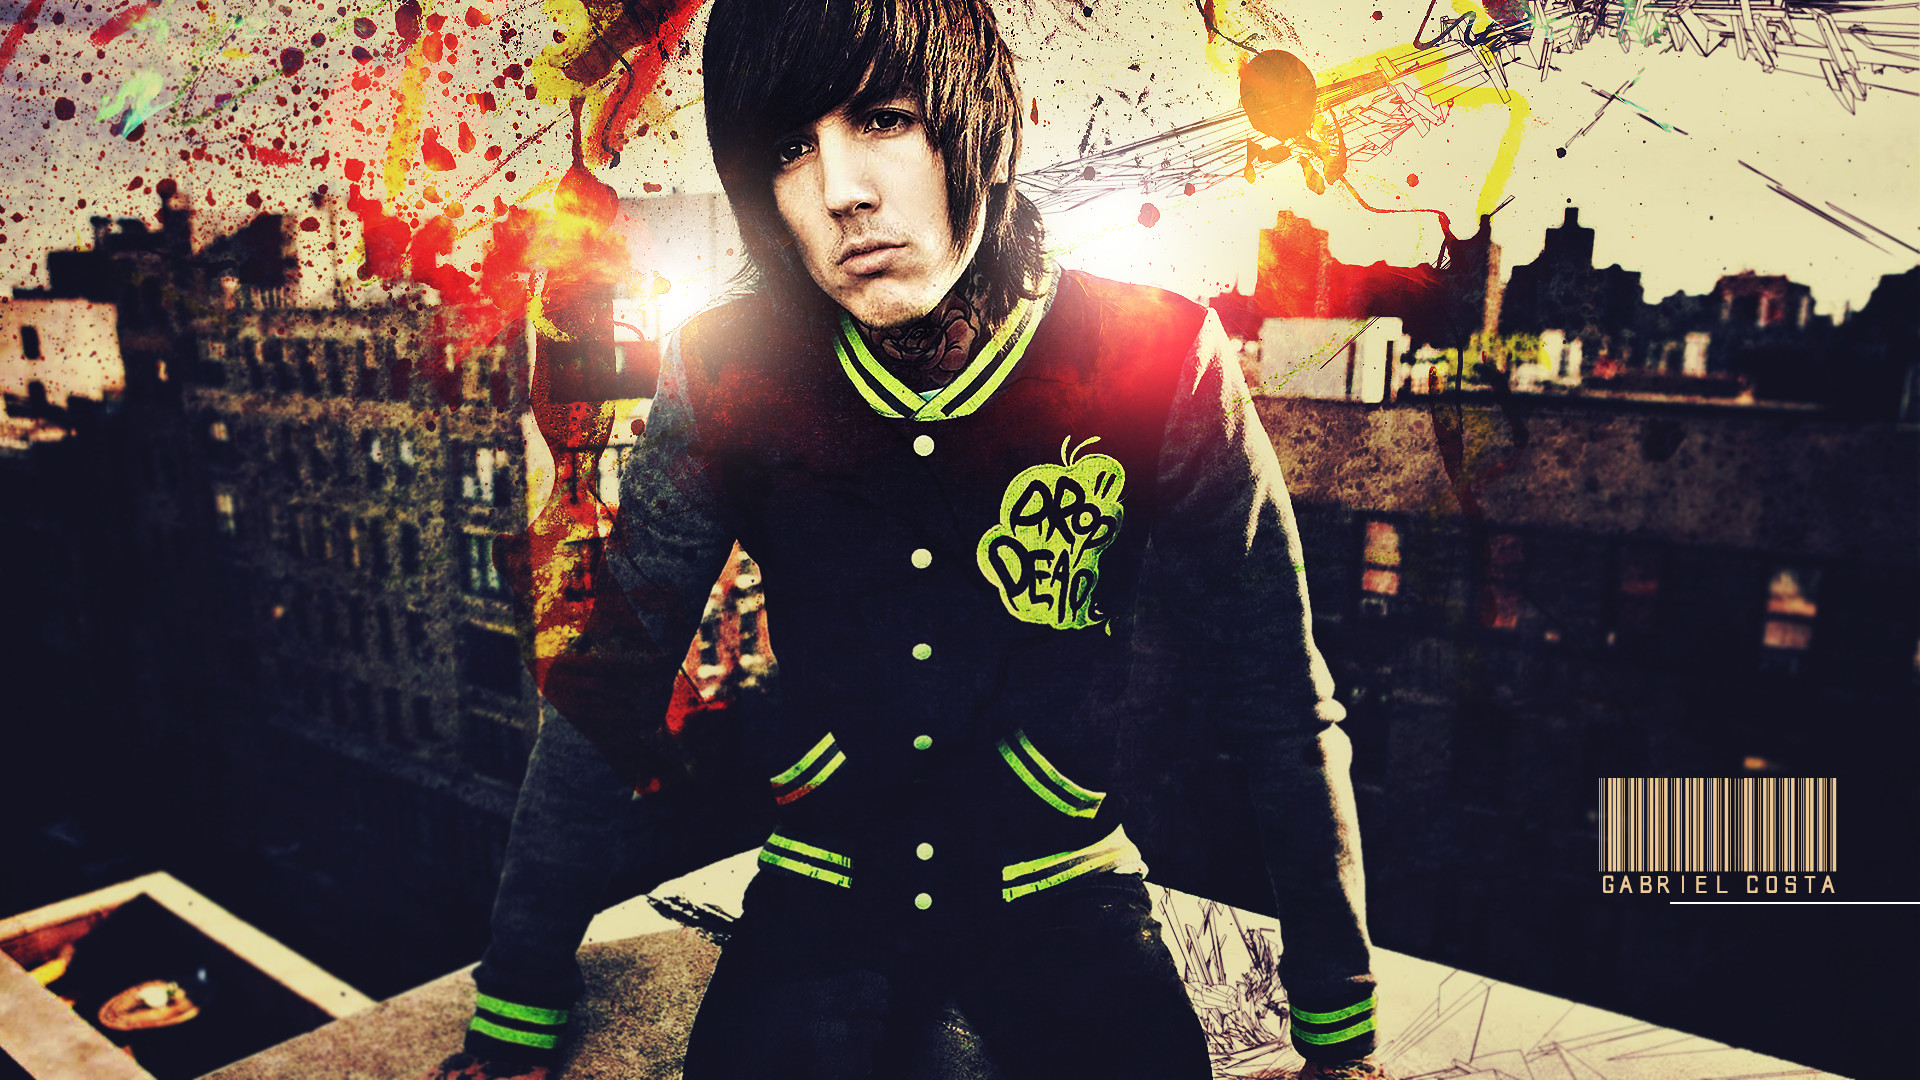 1920x1080 ... Oliver Sykes Wallpaper by Gc-Costa